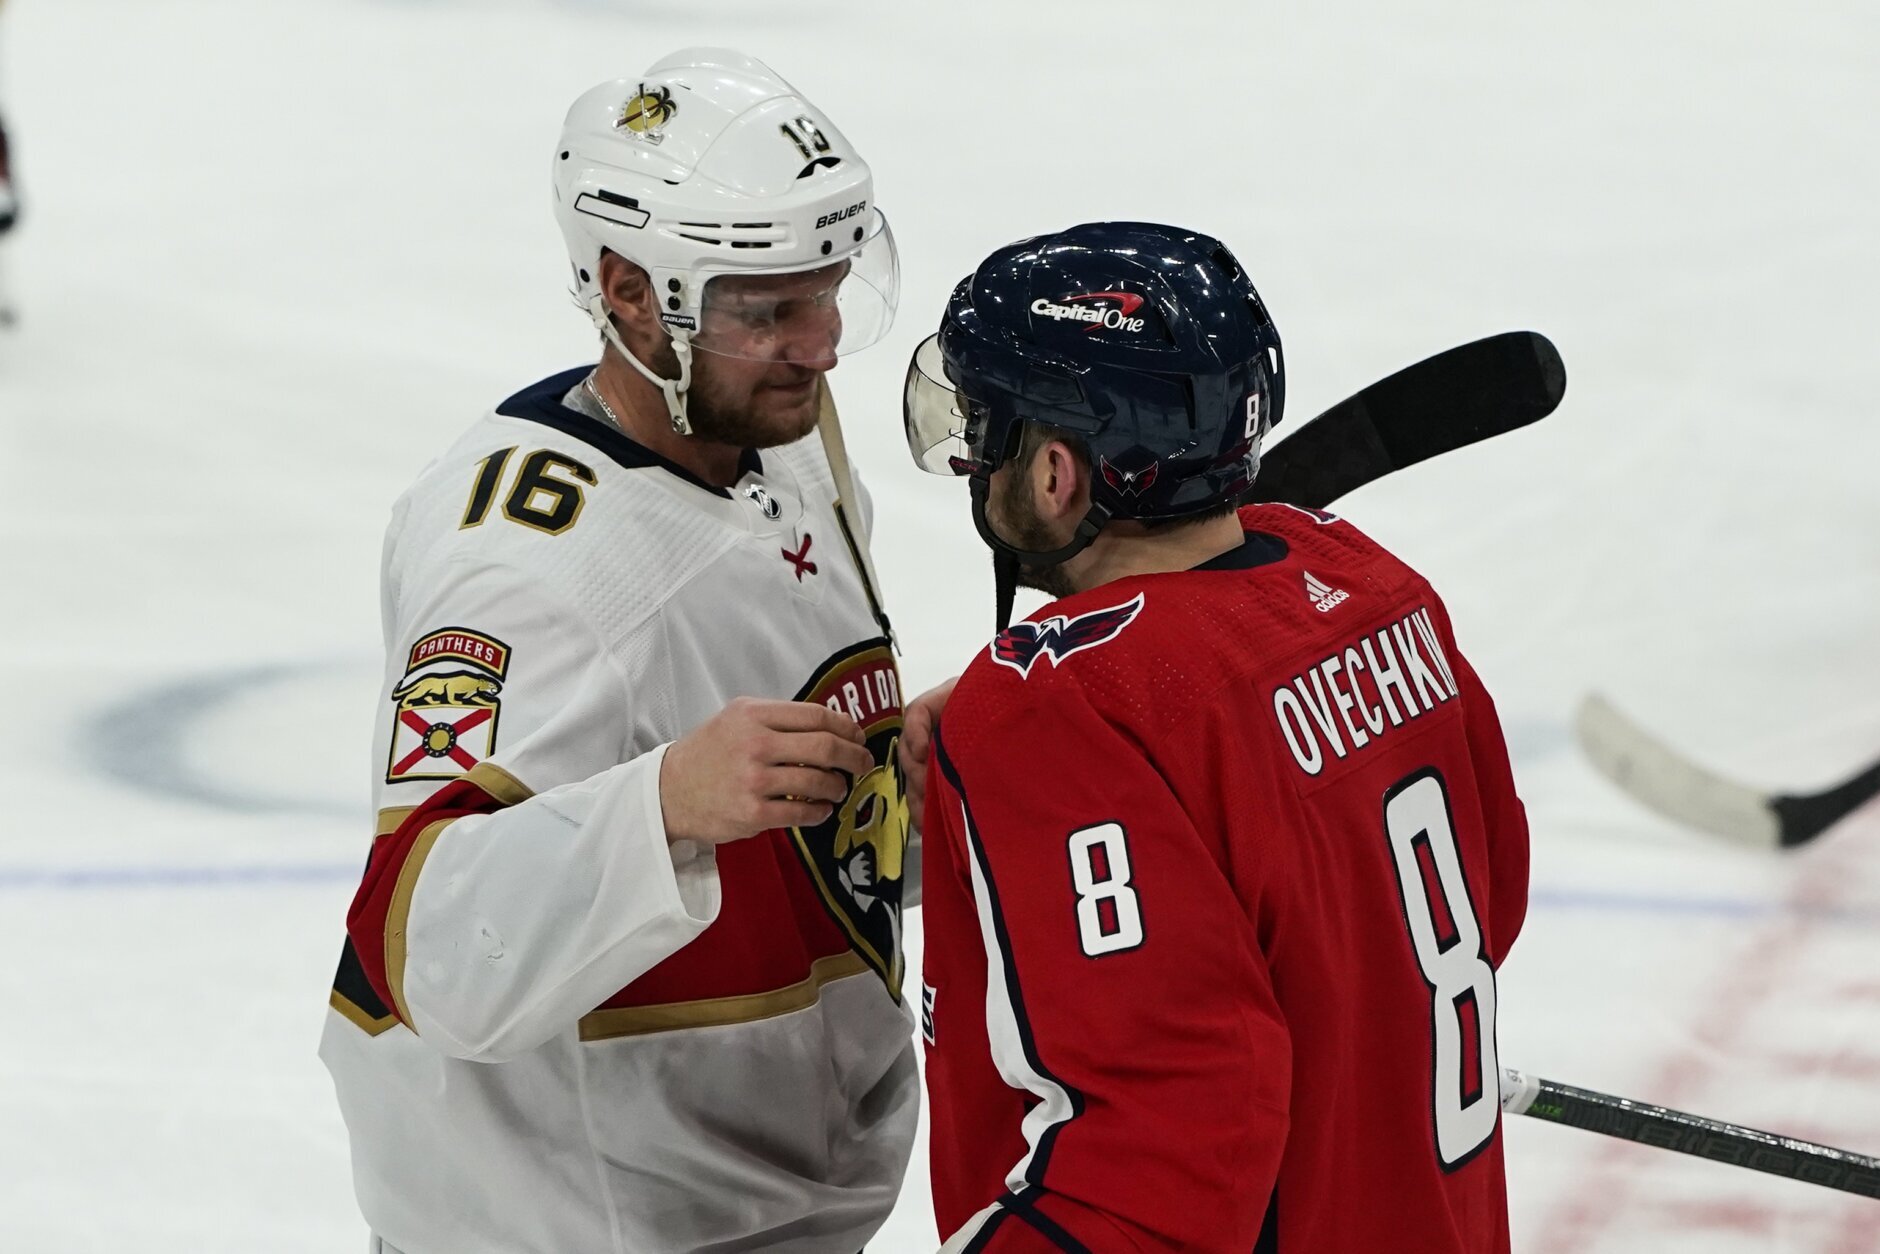 https://wtop.com/wp-content/uploads/2022/05/Panthers_Capitals_Hockey_43495-1880x1254.jpg